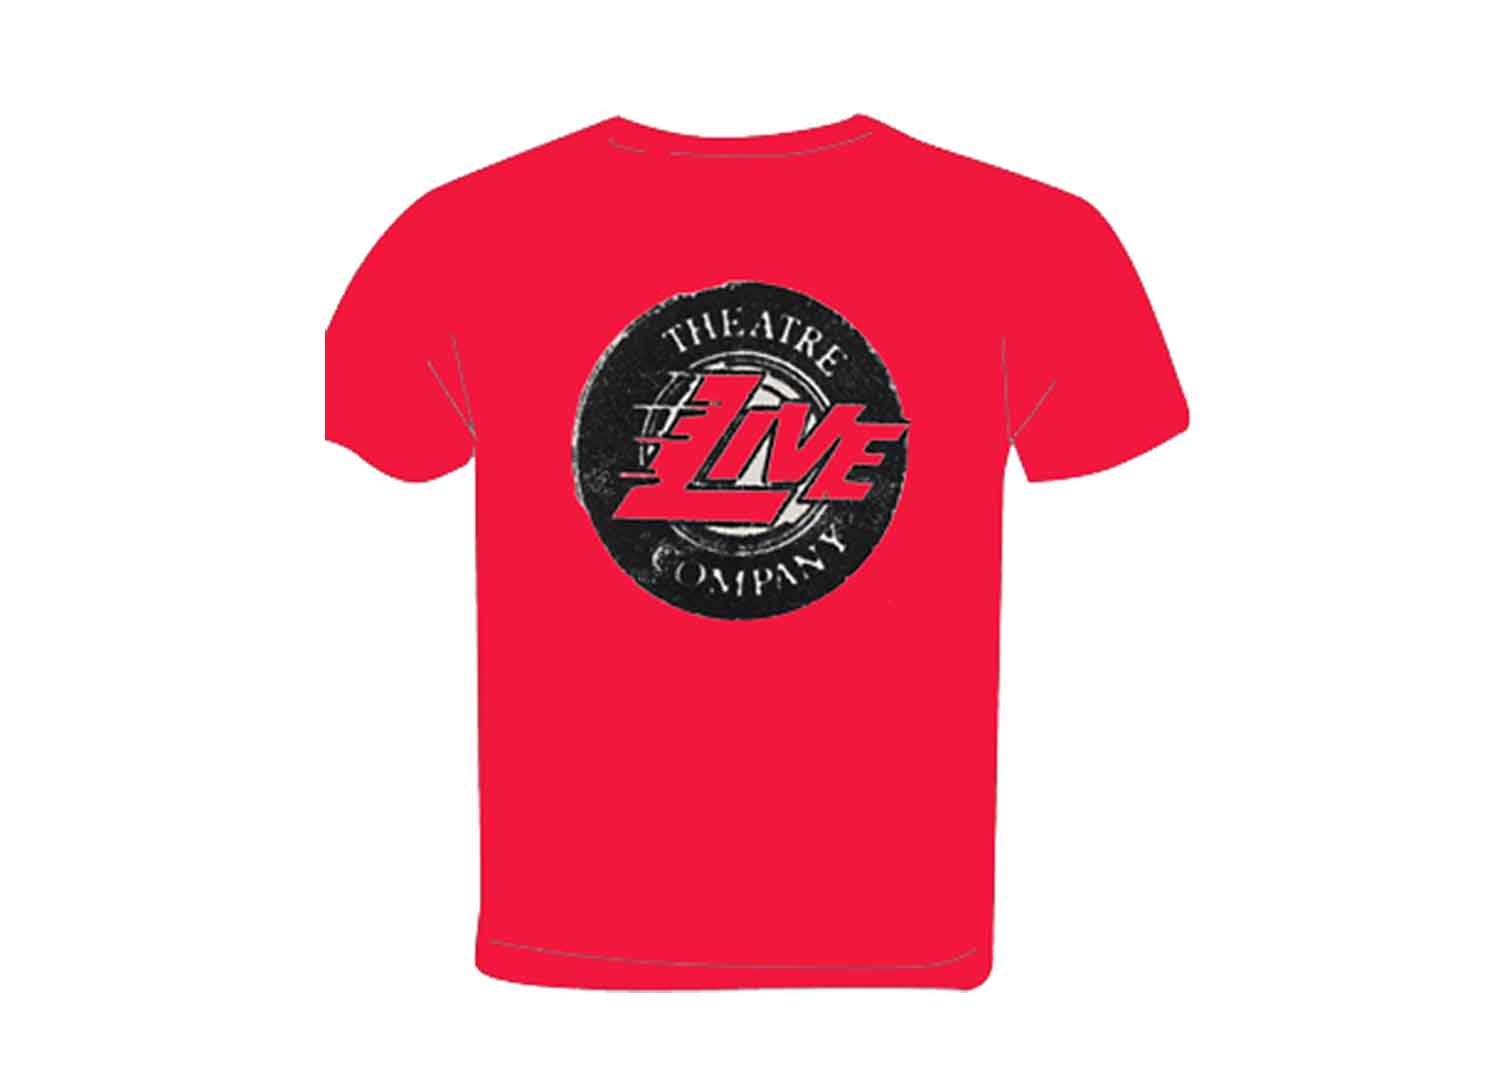 Picture of red T-shirt with black and white logo on it